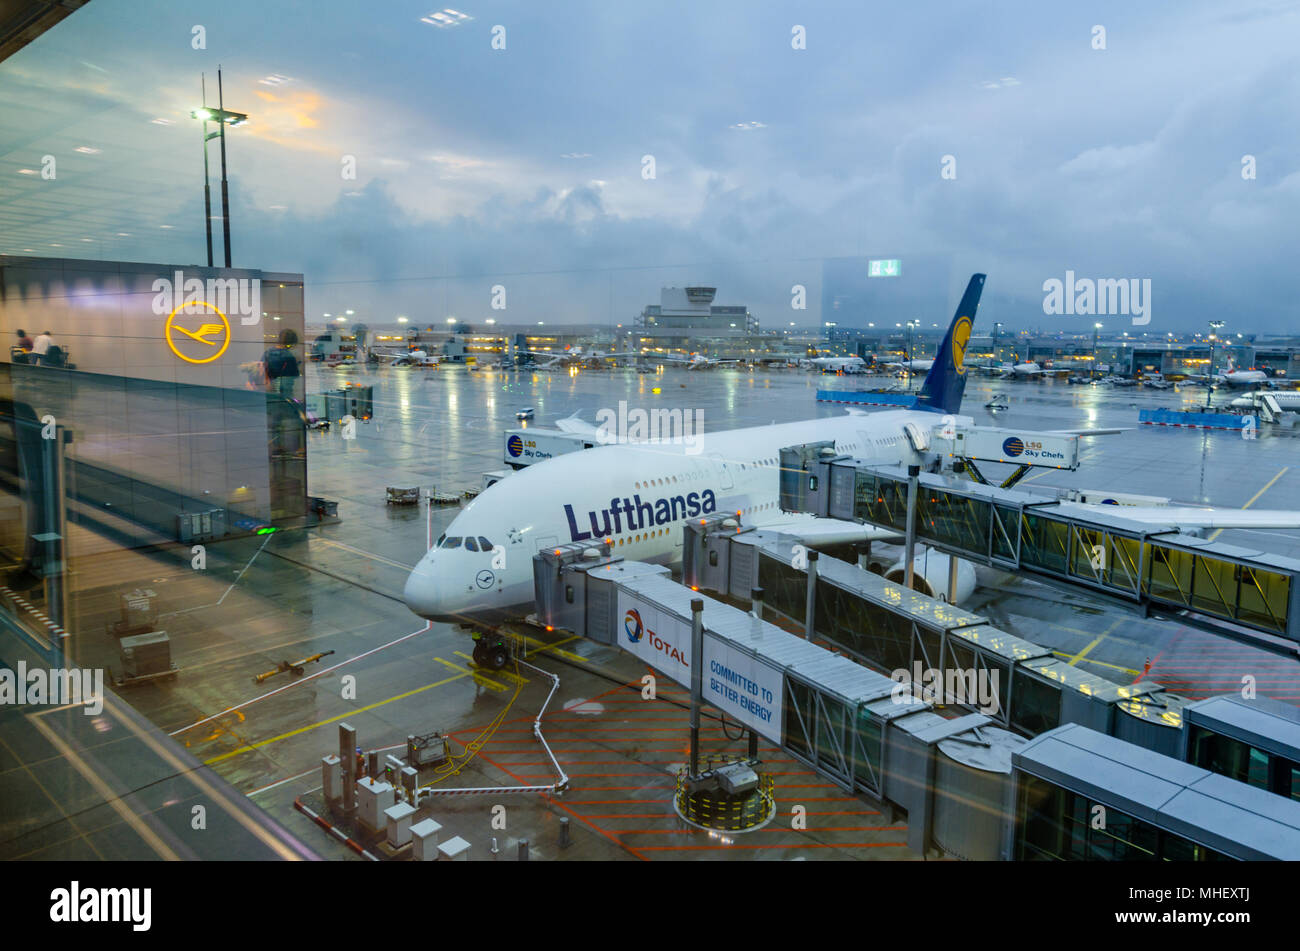 Airbus A380-800 of Lufthansa Airline preparing to take off at Frankfurt Airport of Germany. Lufthansa, is the largest German airline. Stock Photo